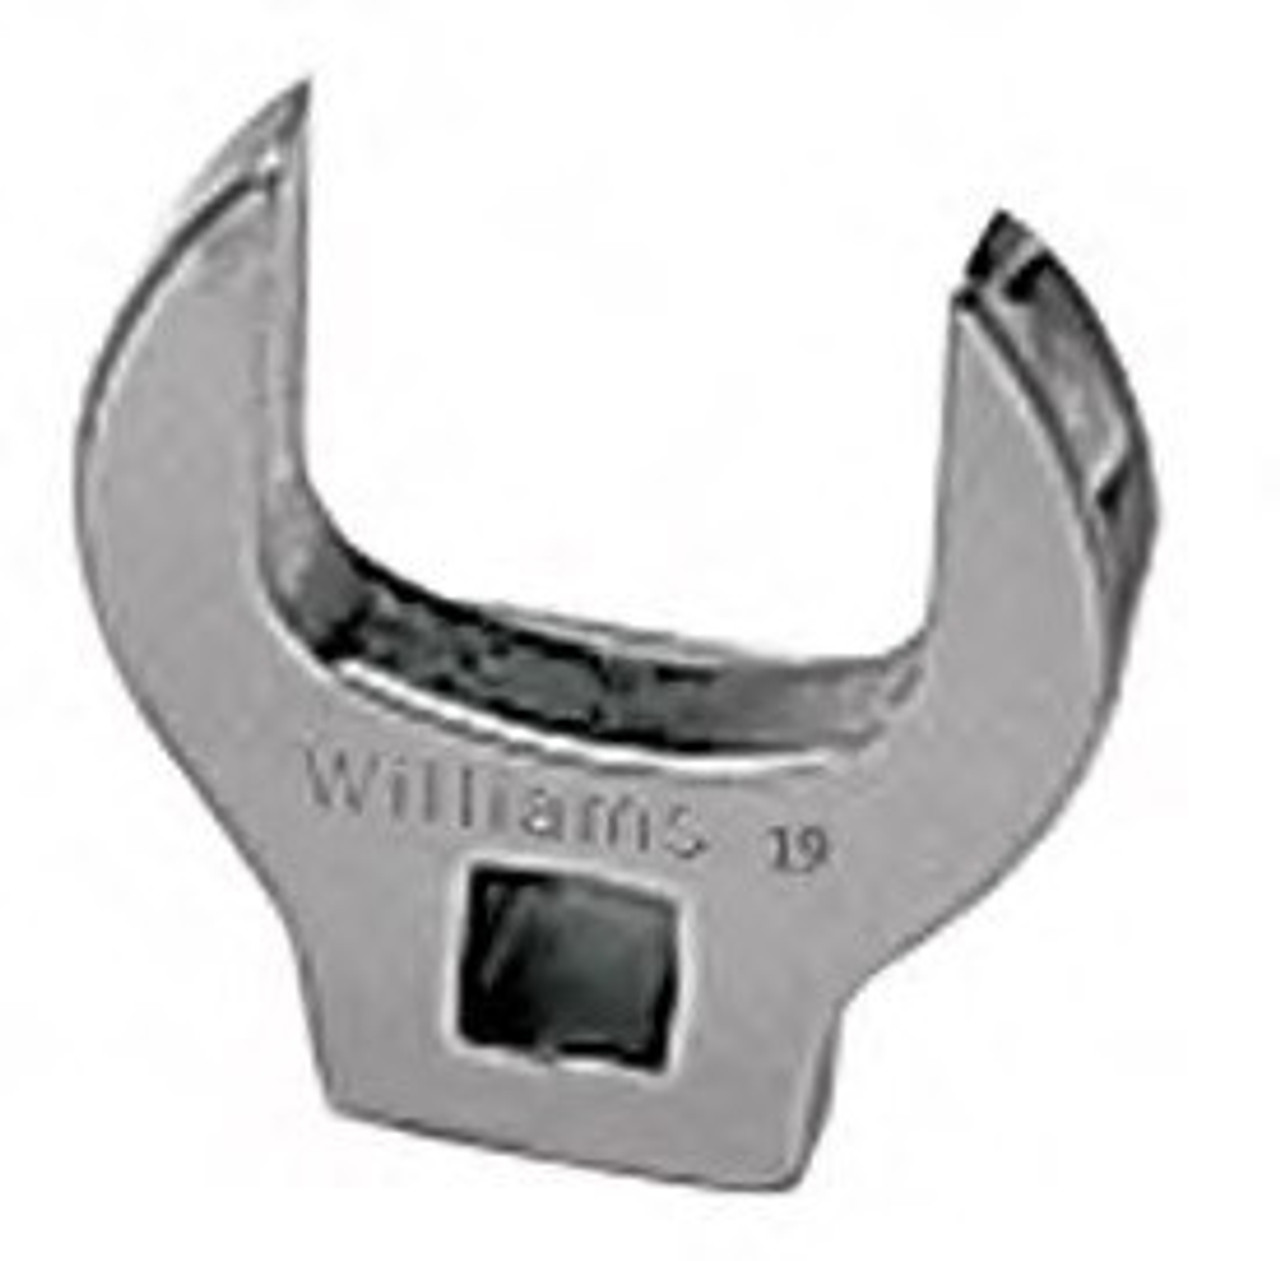 Williams 5/8 Williams 3/8 Dr Crowfoot Wrench - JHWBCO20